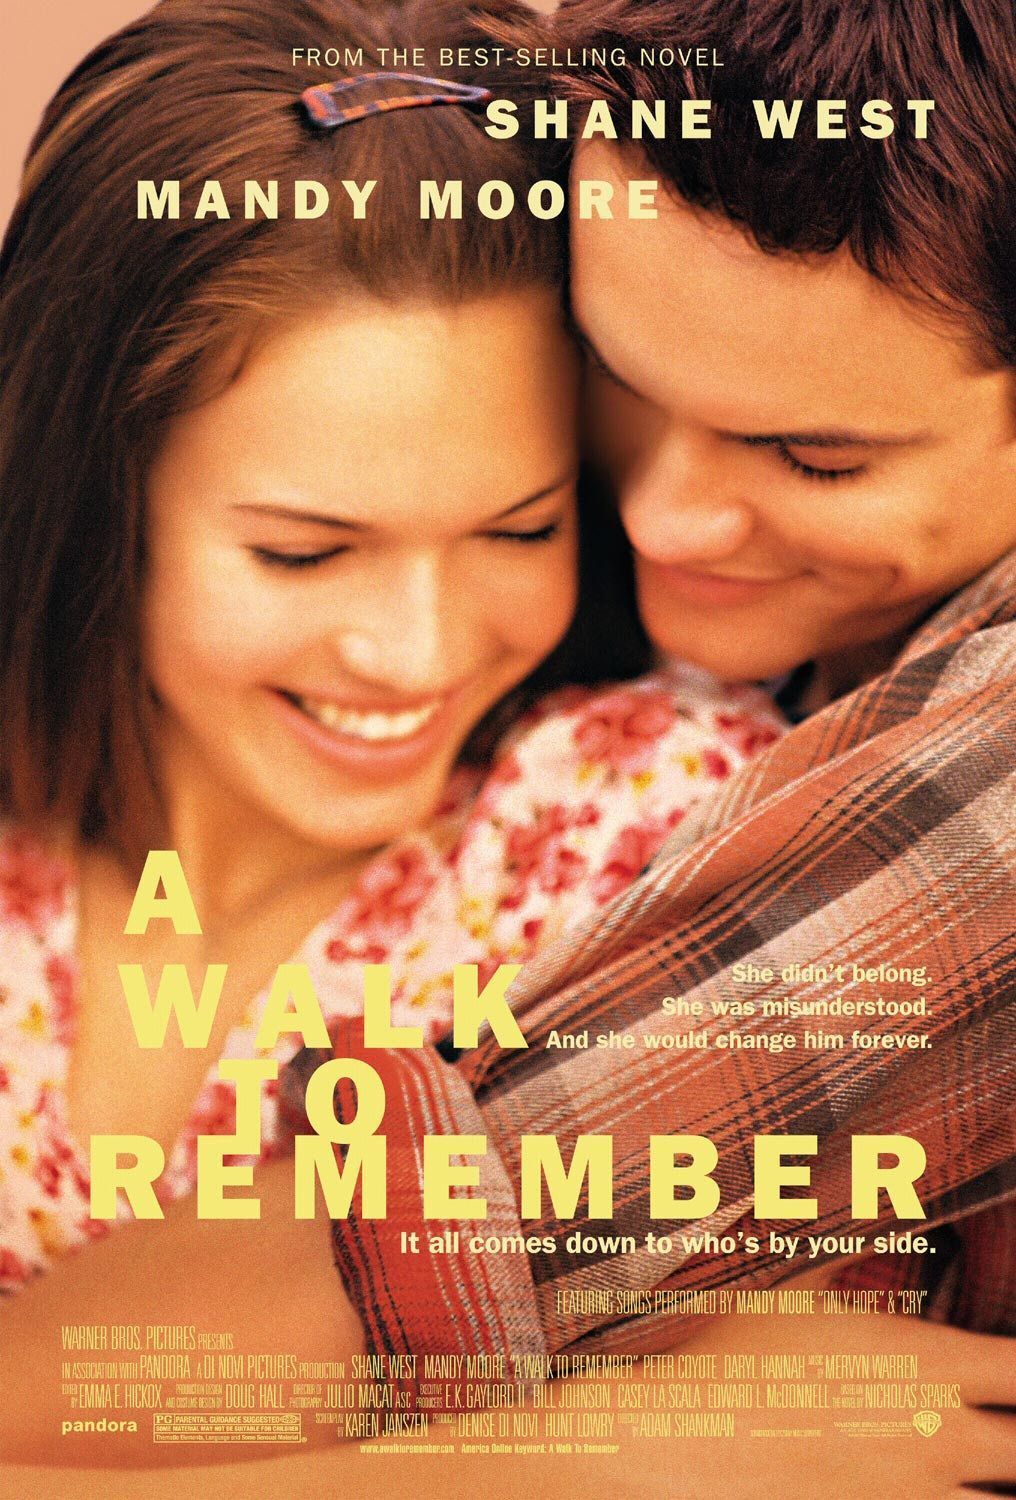 book review of a walk to remember